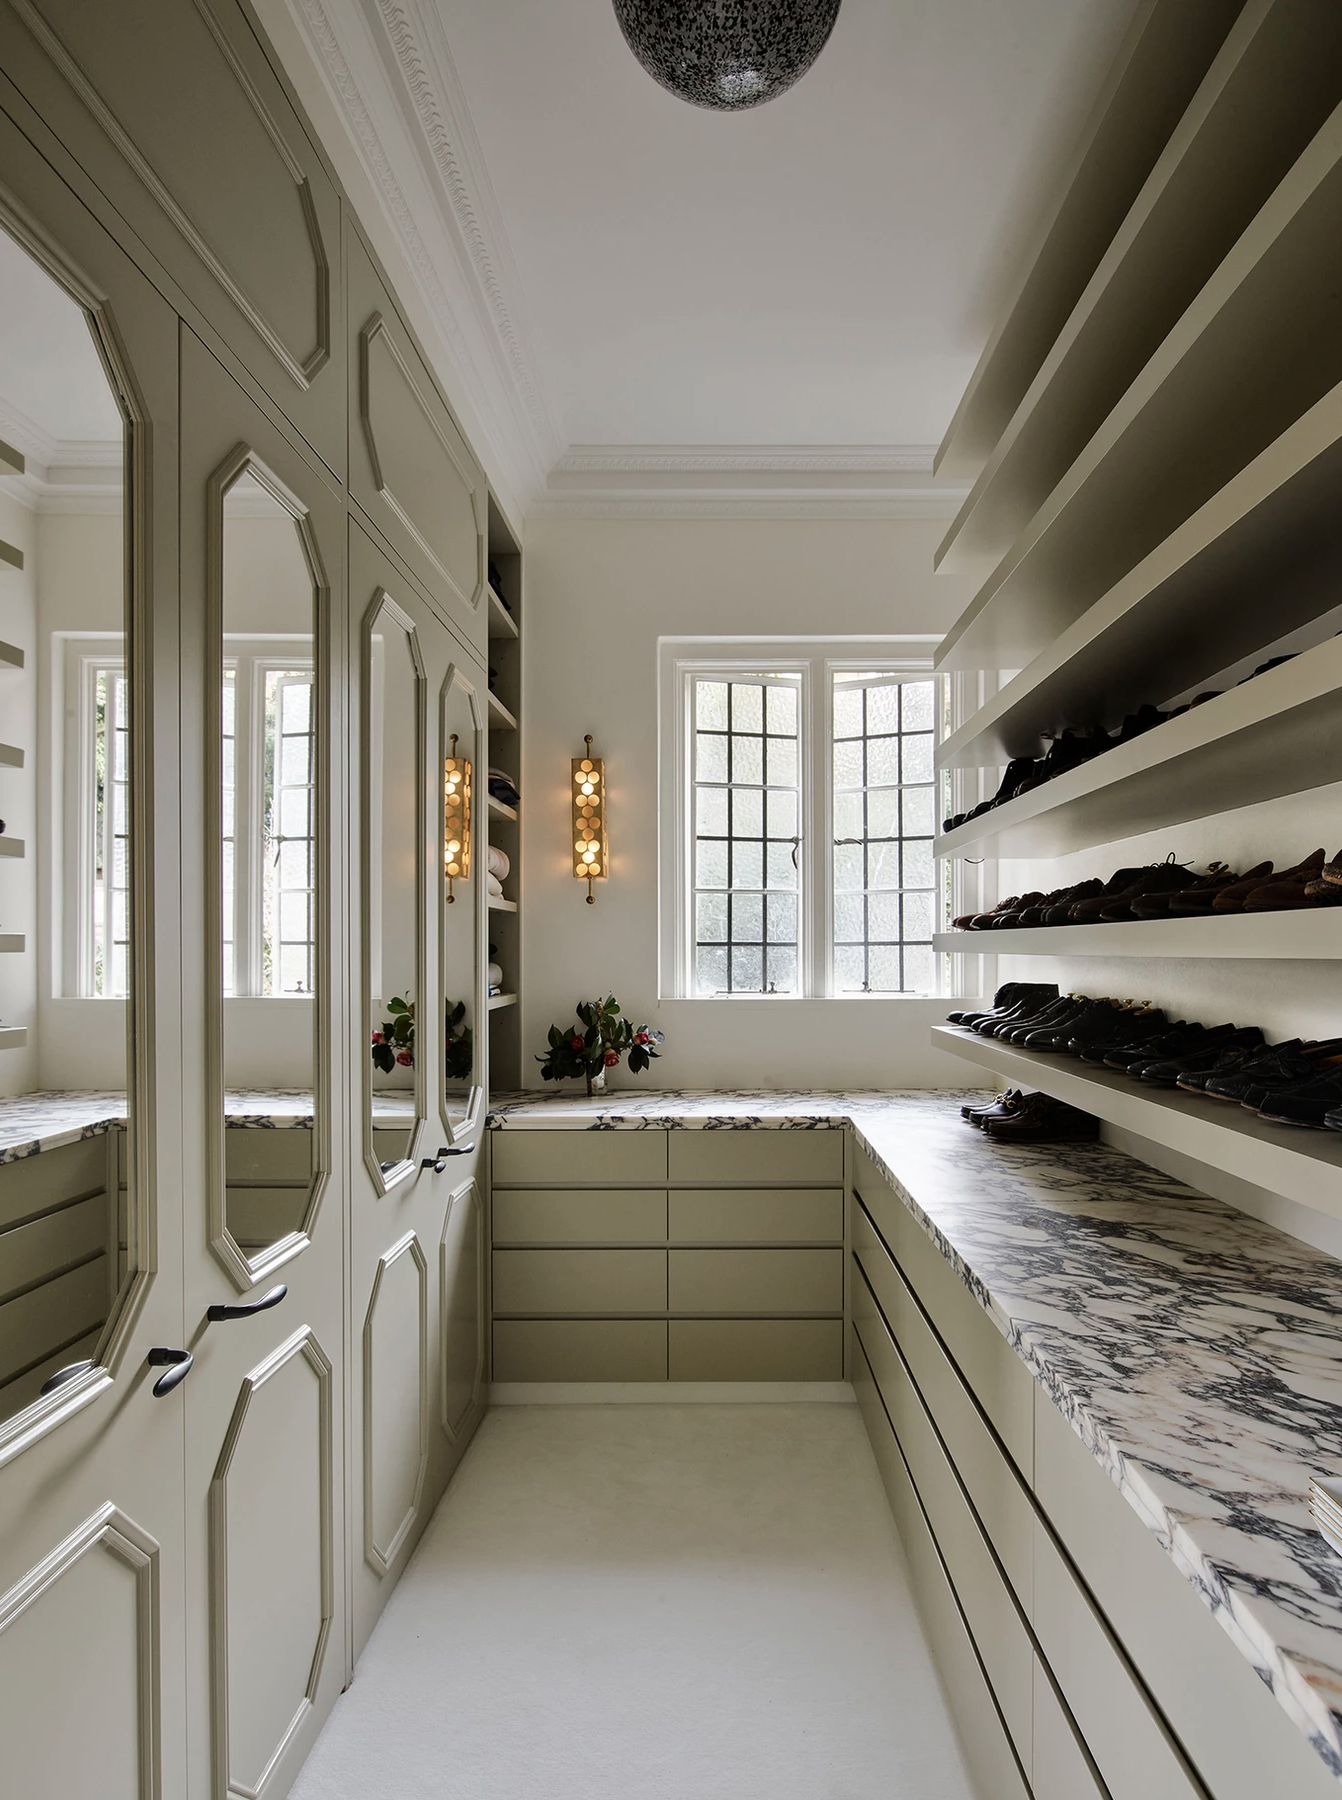 16 Luxe Walk-In Closet Designs For A Traditional Home